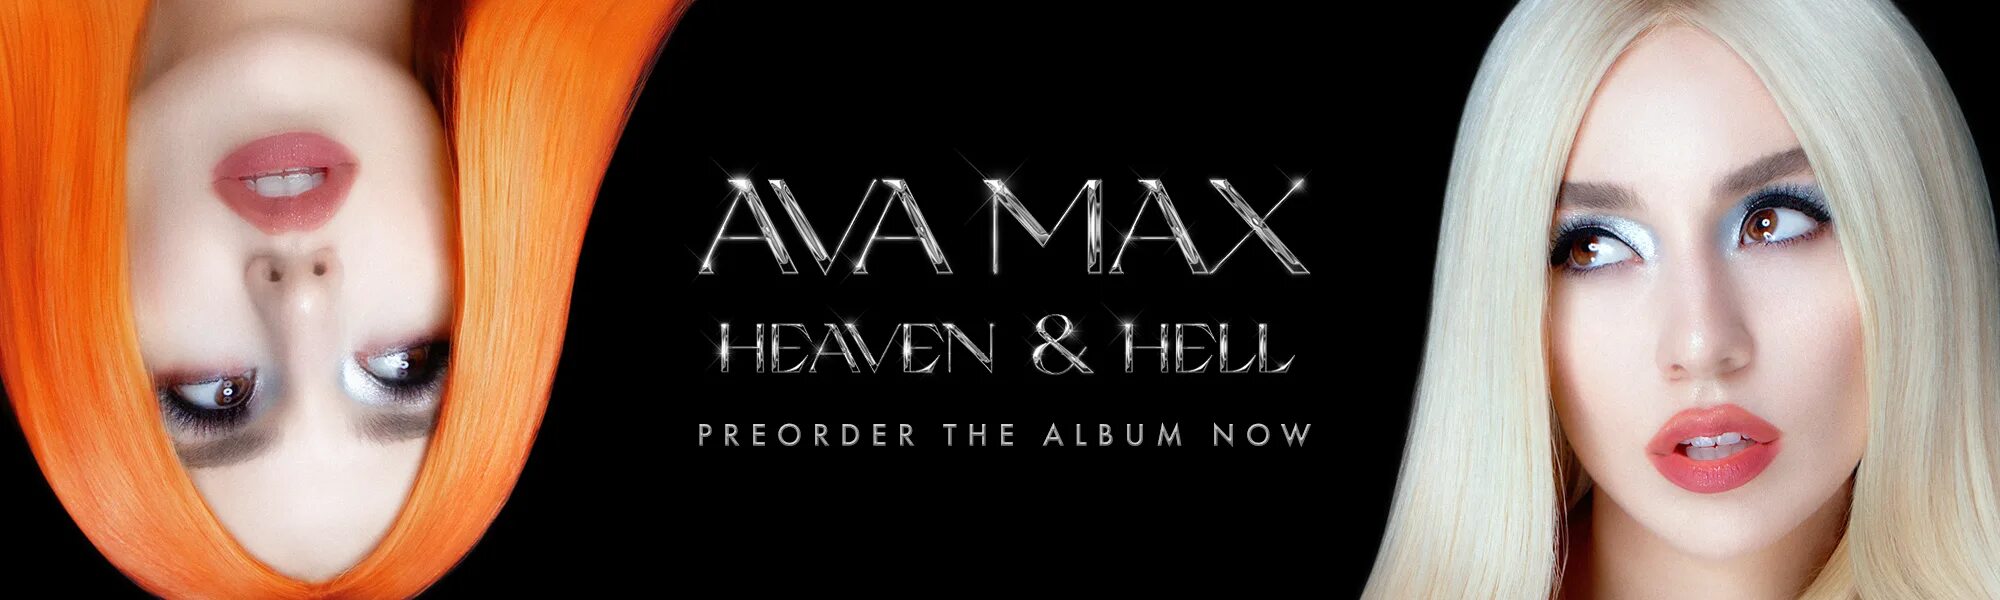 Ava Max Hell. Ava Max "Heaven & Hell". Ava Max Heaven Hell обложка. Ava Max - (2020) - Heaven & Hell. Take you to hell ava